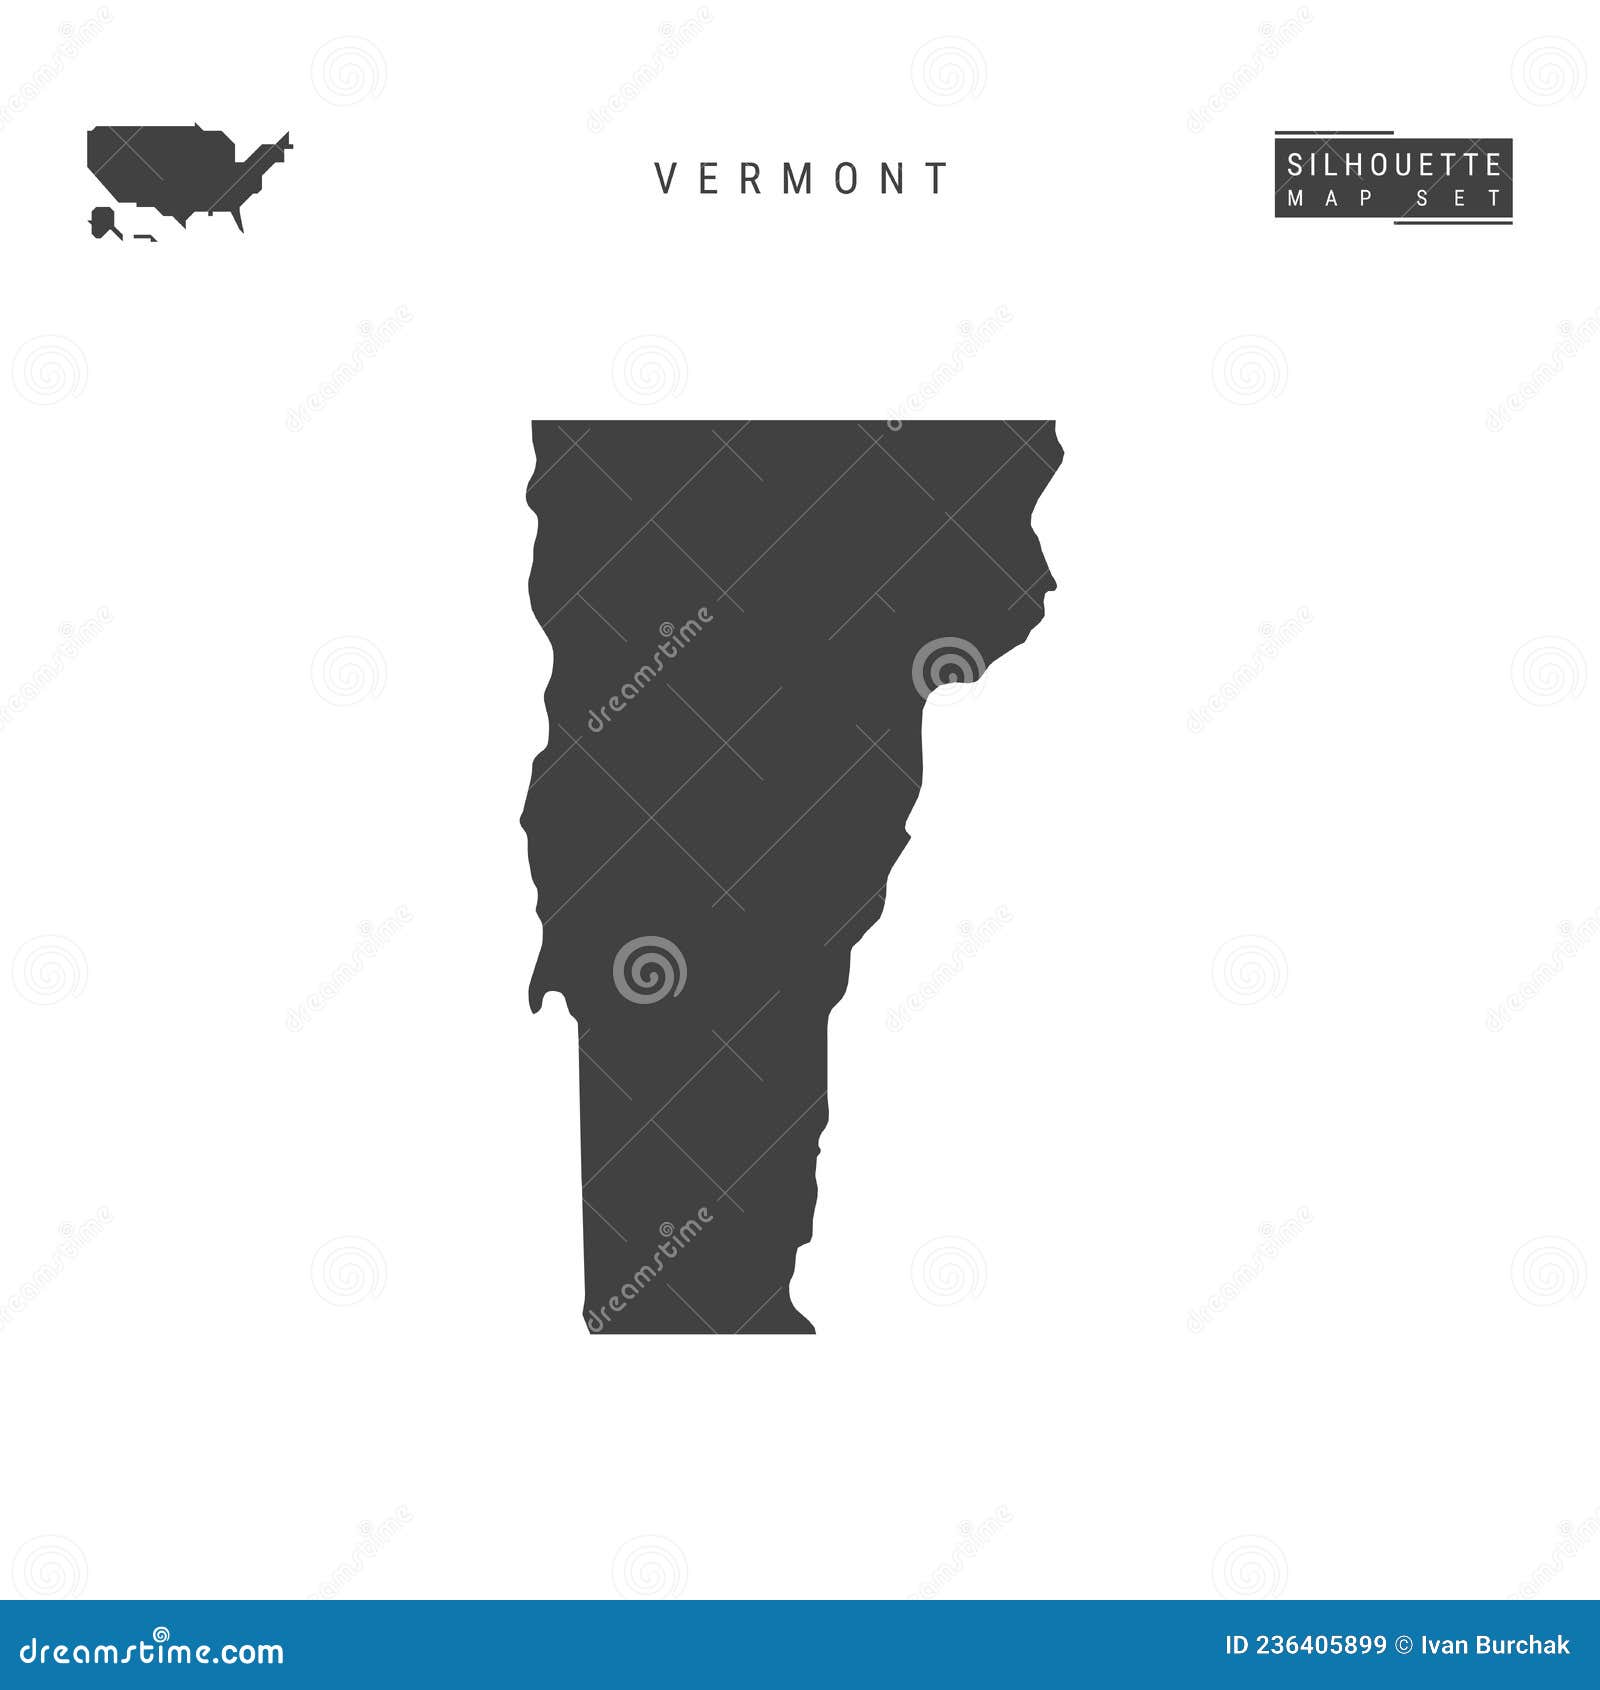 Vermont Us State Vector Map Isolated On White Background High Detailed